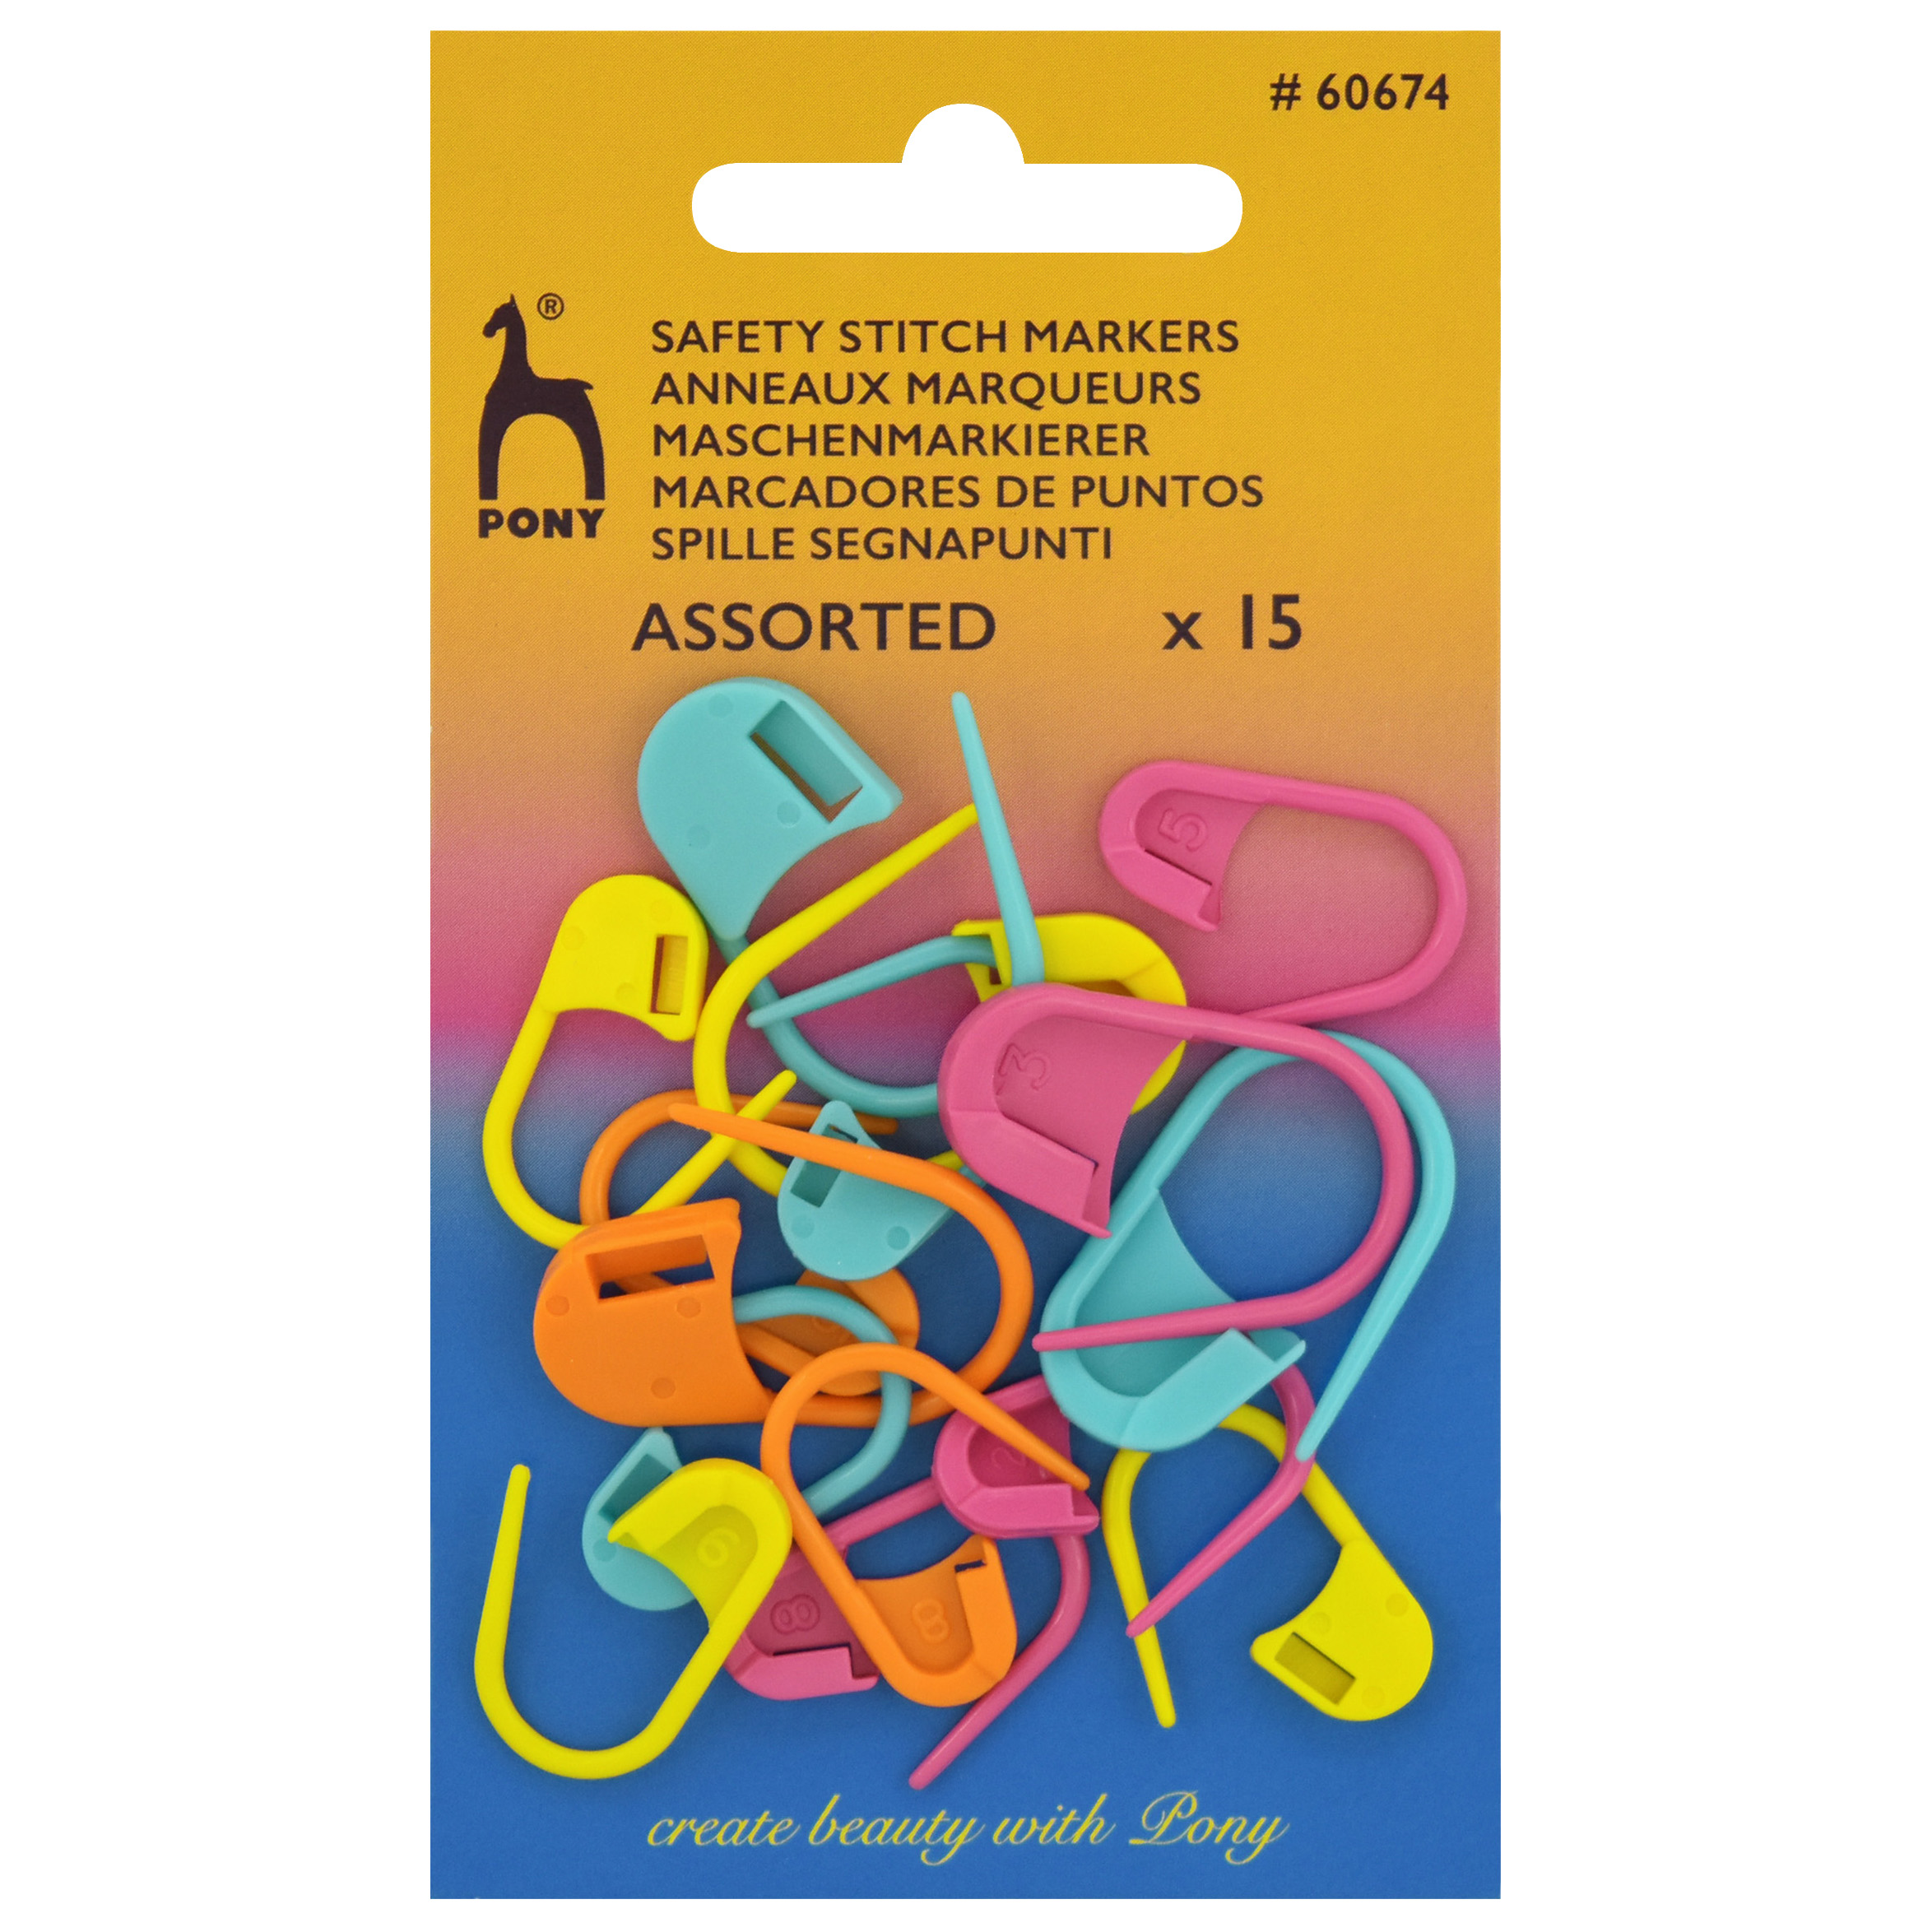 STITCH MARKERS - PLASTIC SAFETY PINS x10 —  - Yarns, Patterns and  Accessories